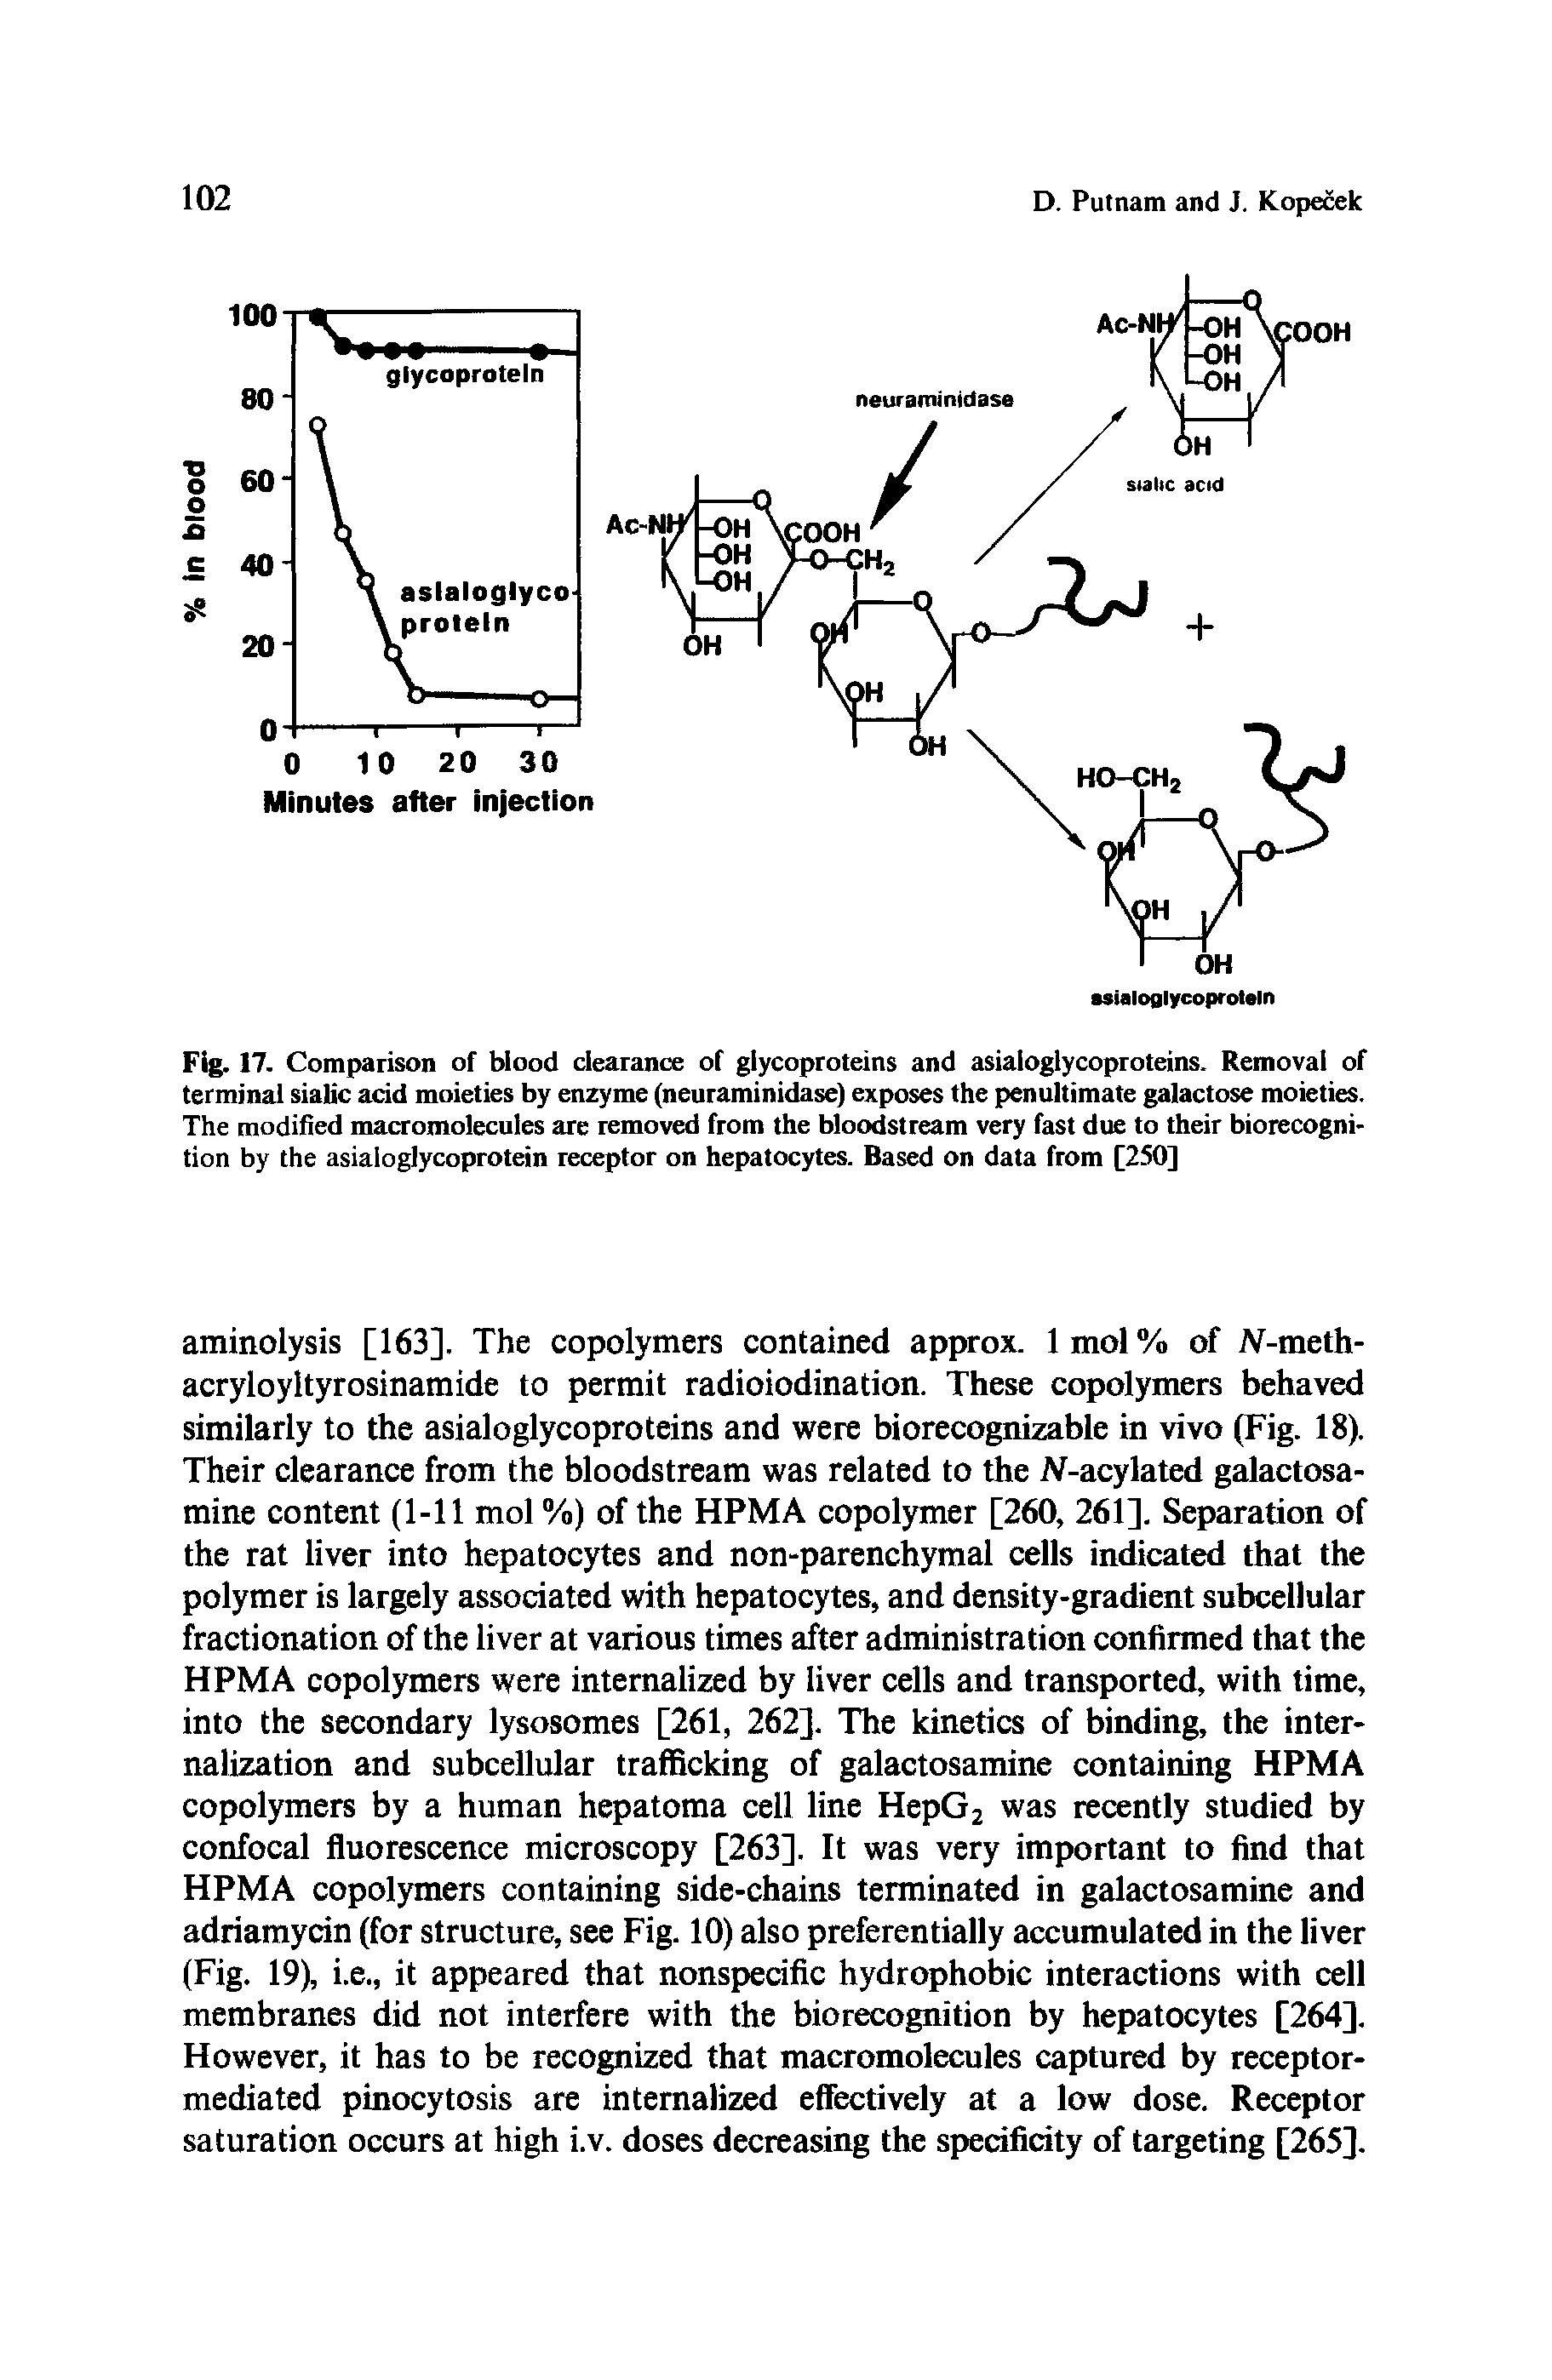 Fig. 17. Comparison of blood clearance of glycoproteins and asialoglycoproteins. Removal of terminal sialic acid moieties by enzyme (neuraminidase) exposes the penultimate galactose moieties. The modified macromolecules are removed from the bloodstream very fast due to their biorecognition by the asialoglycoprotein receptor on hepatocytes. Based on data from [250]...